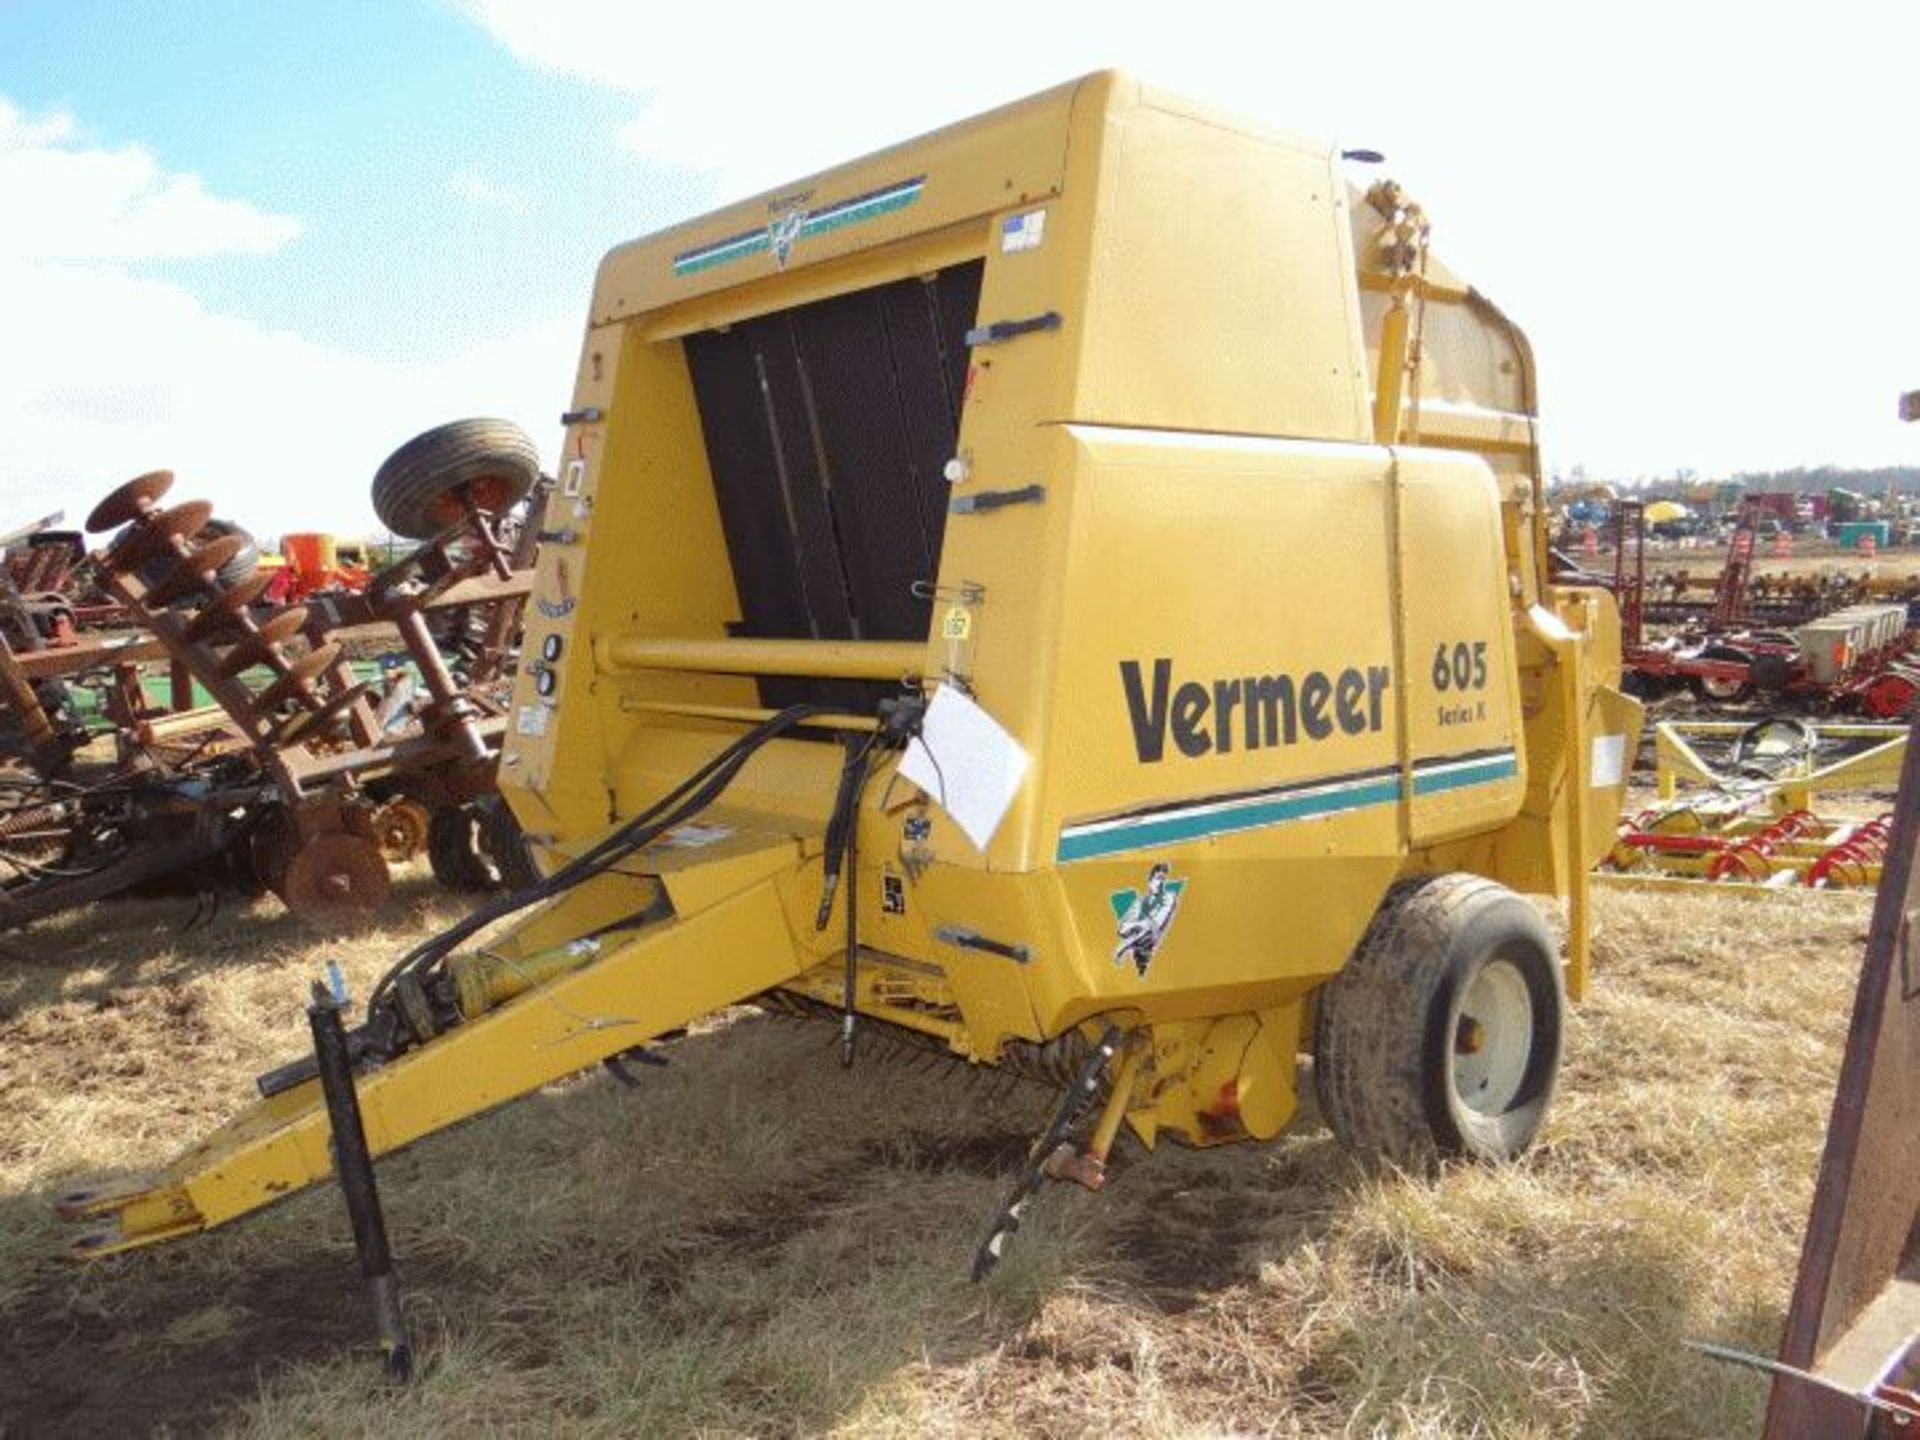 Lot # 1667 Vermeer 605K Round Baler 540 PTO, Twine, Net Wrap, Bale Kicker, Monitor and Manual in the